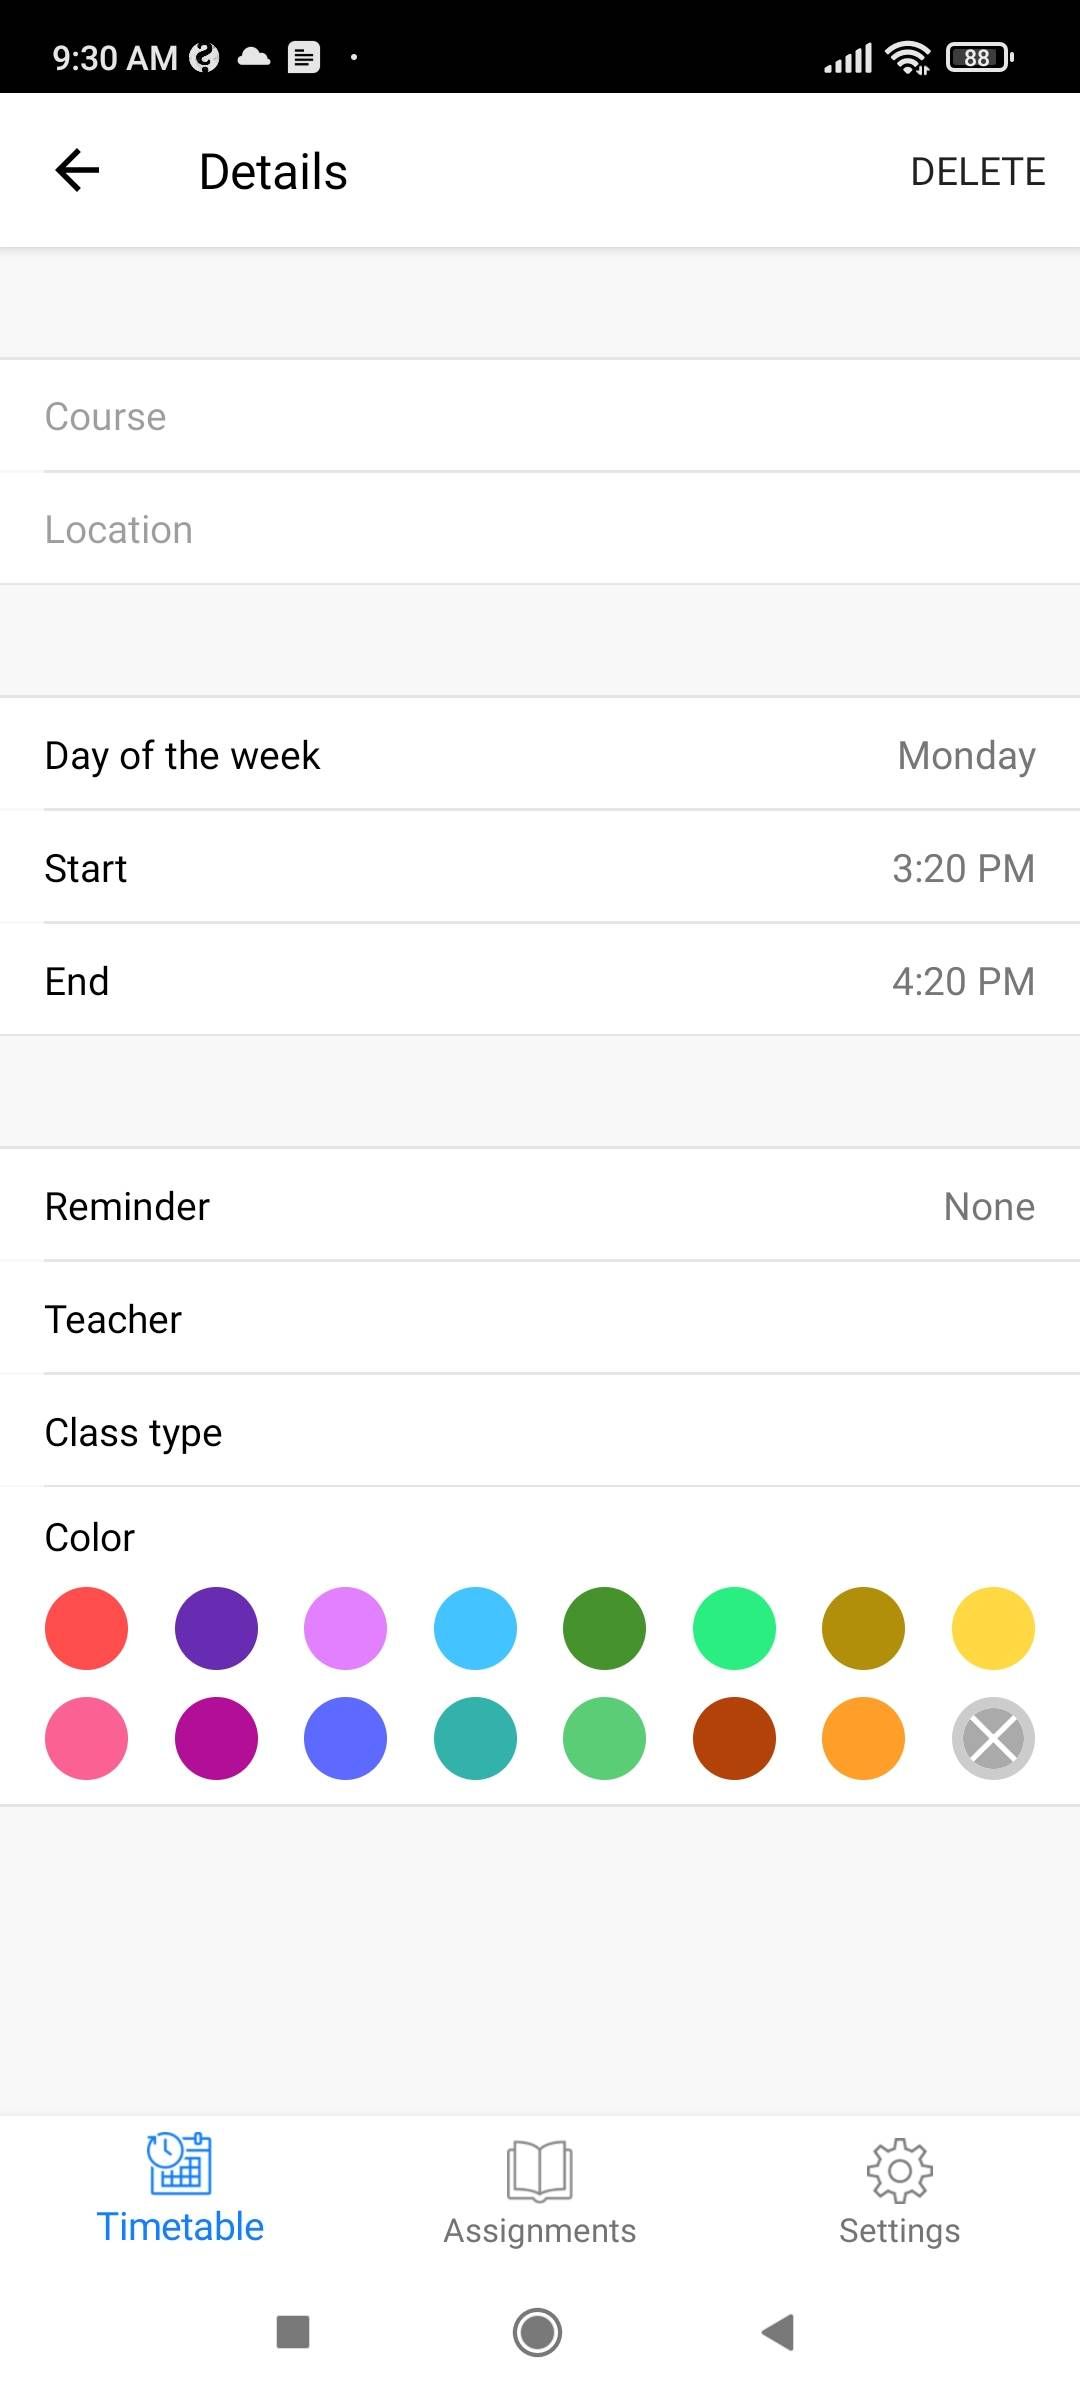 Set the class's name, teacher, location, date and timing, and assign it a color to group similar classes together